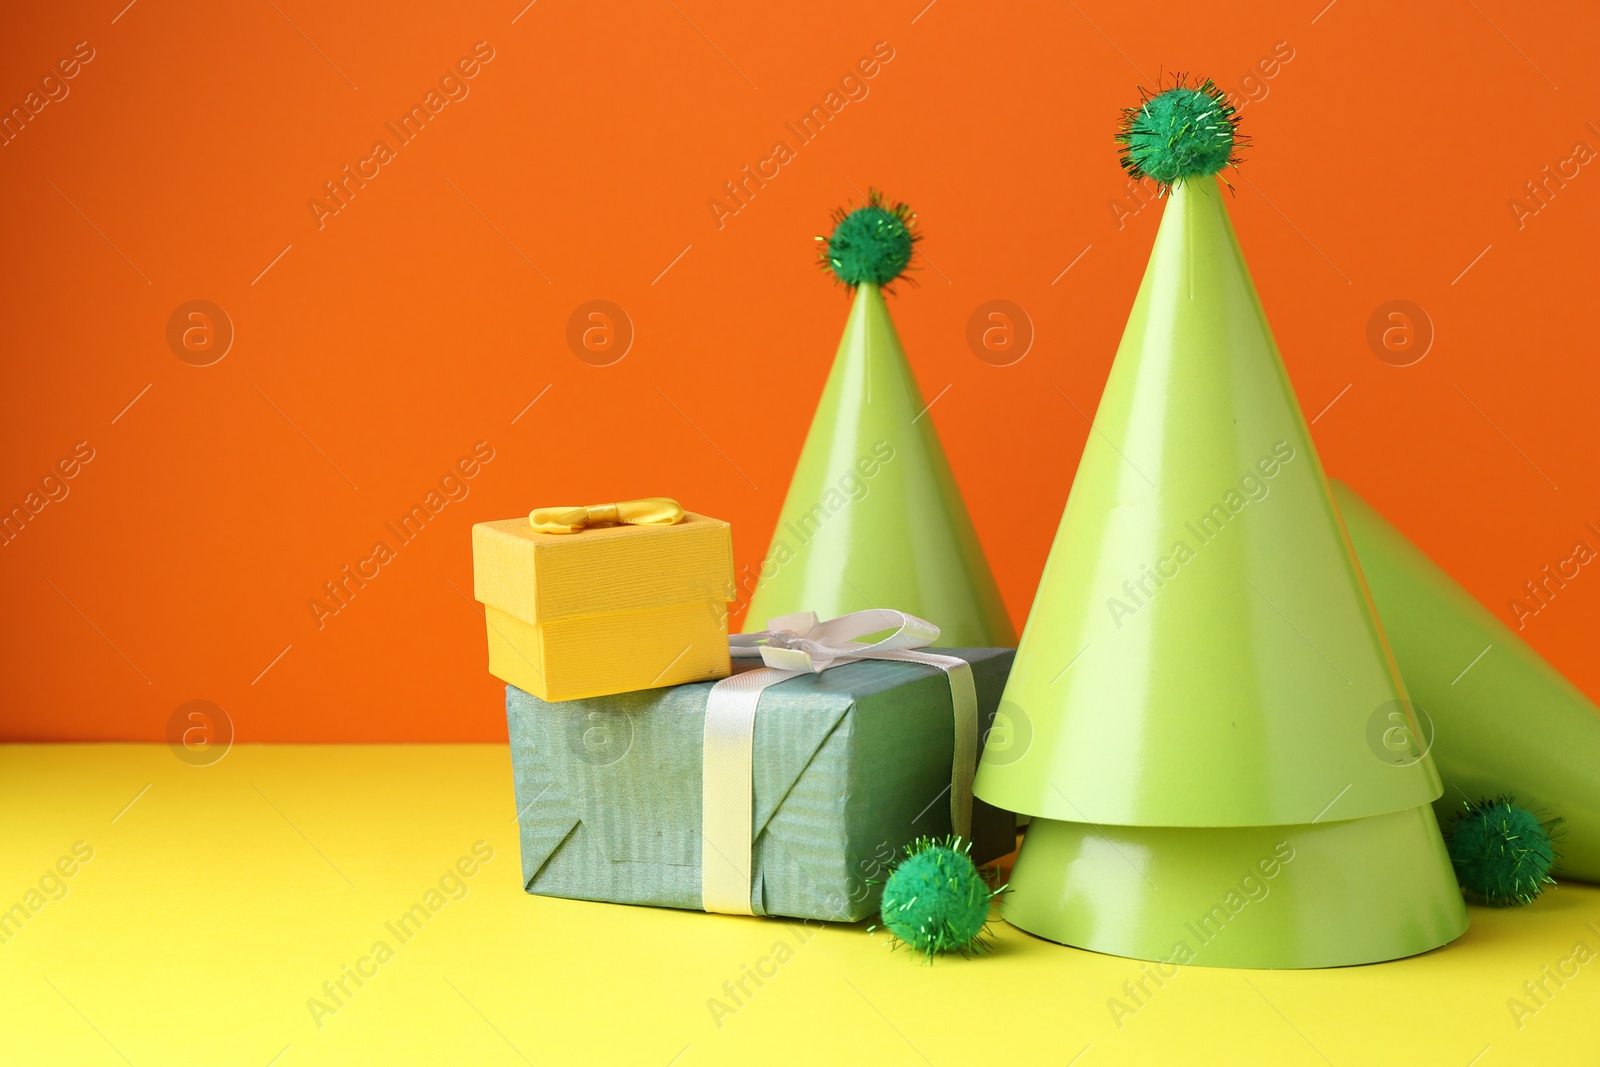 Photo of Party hats and gift boxes on yellow table against orange background, space for text